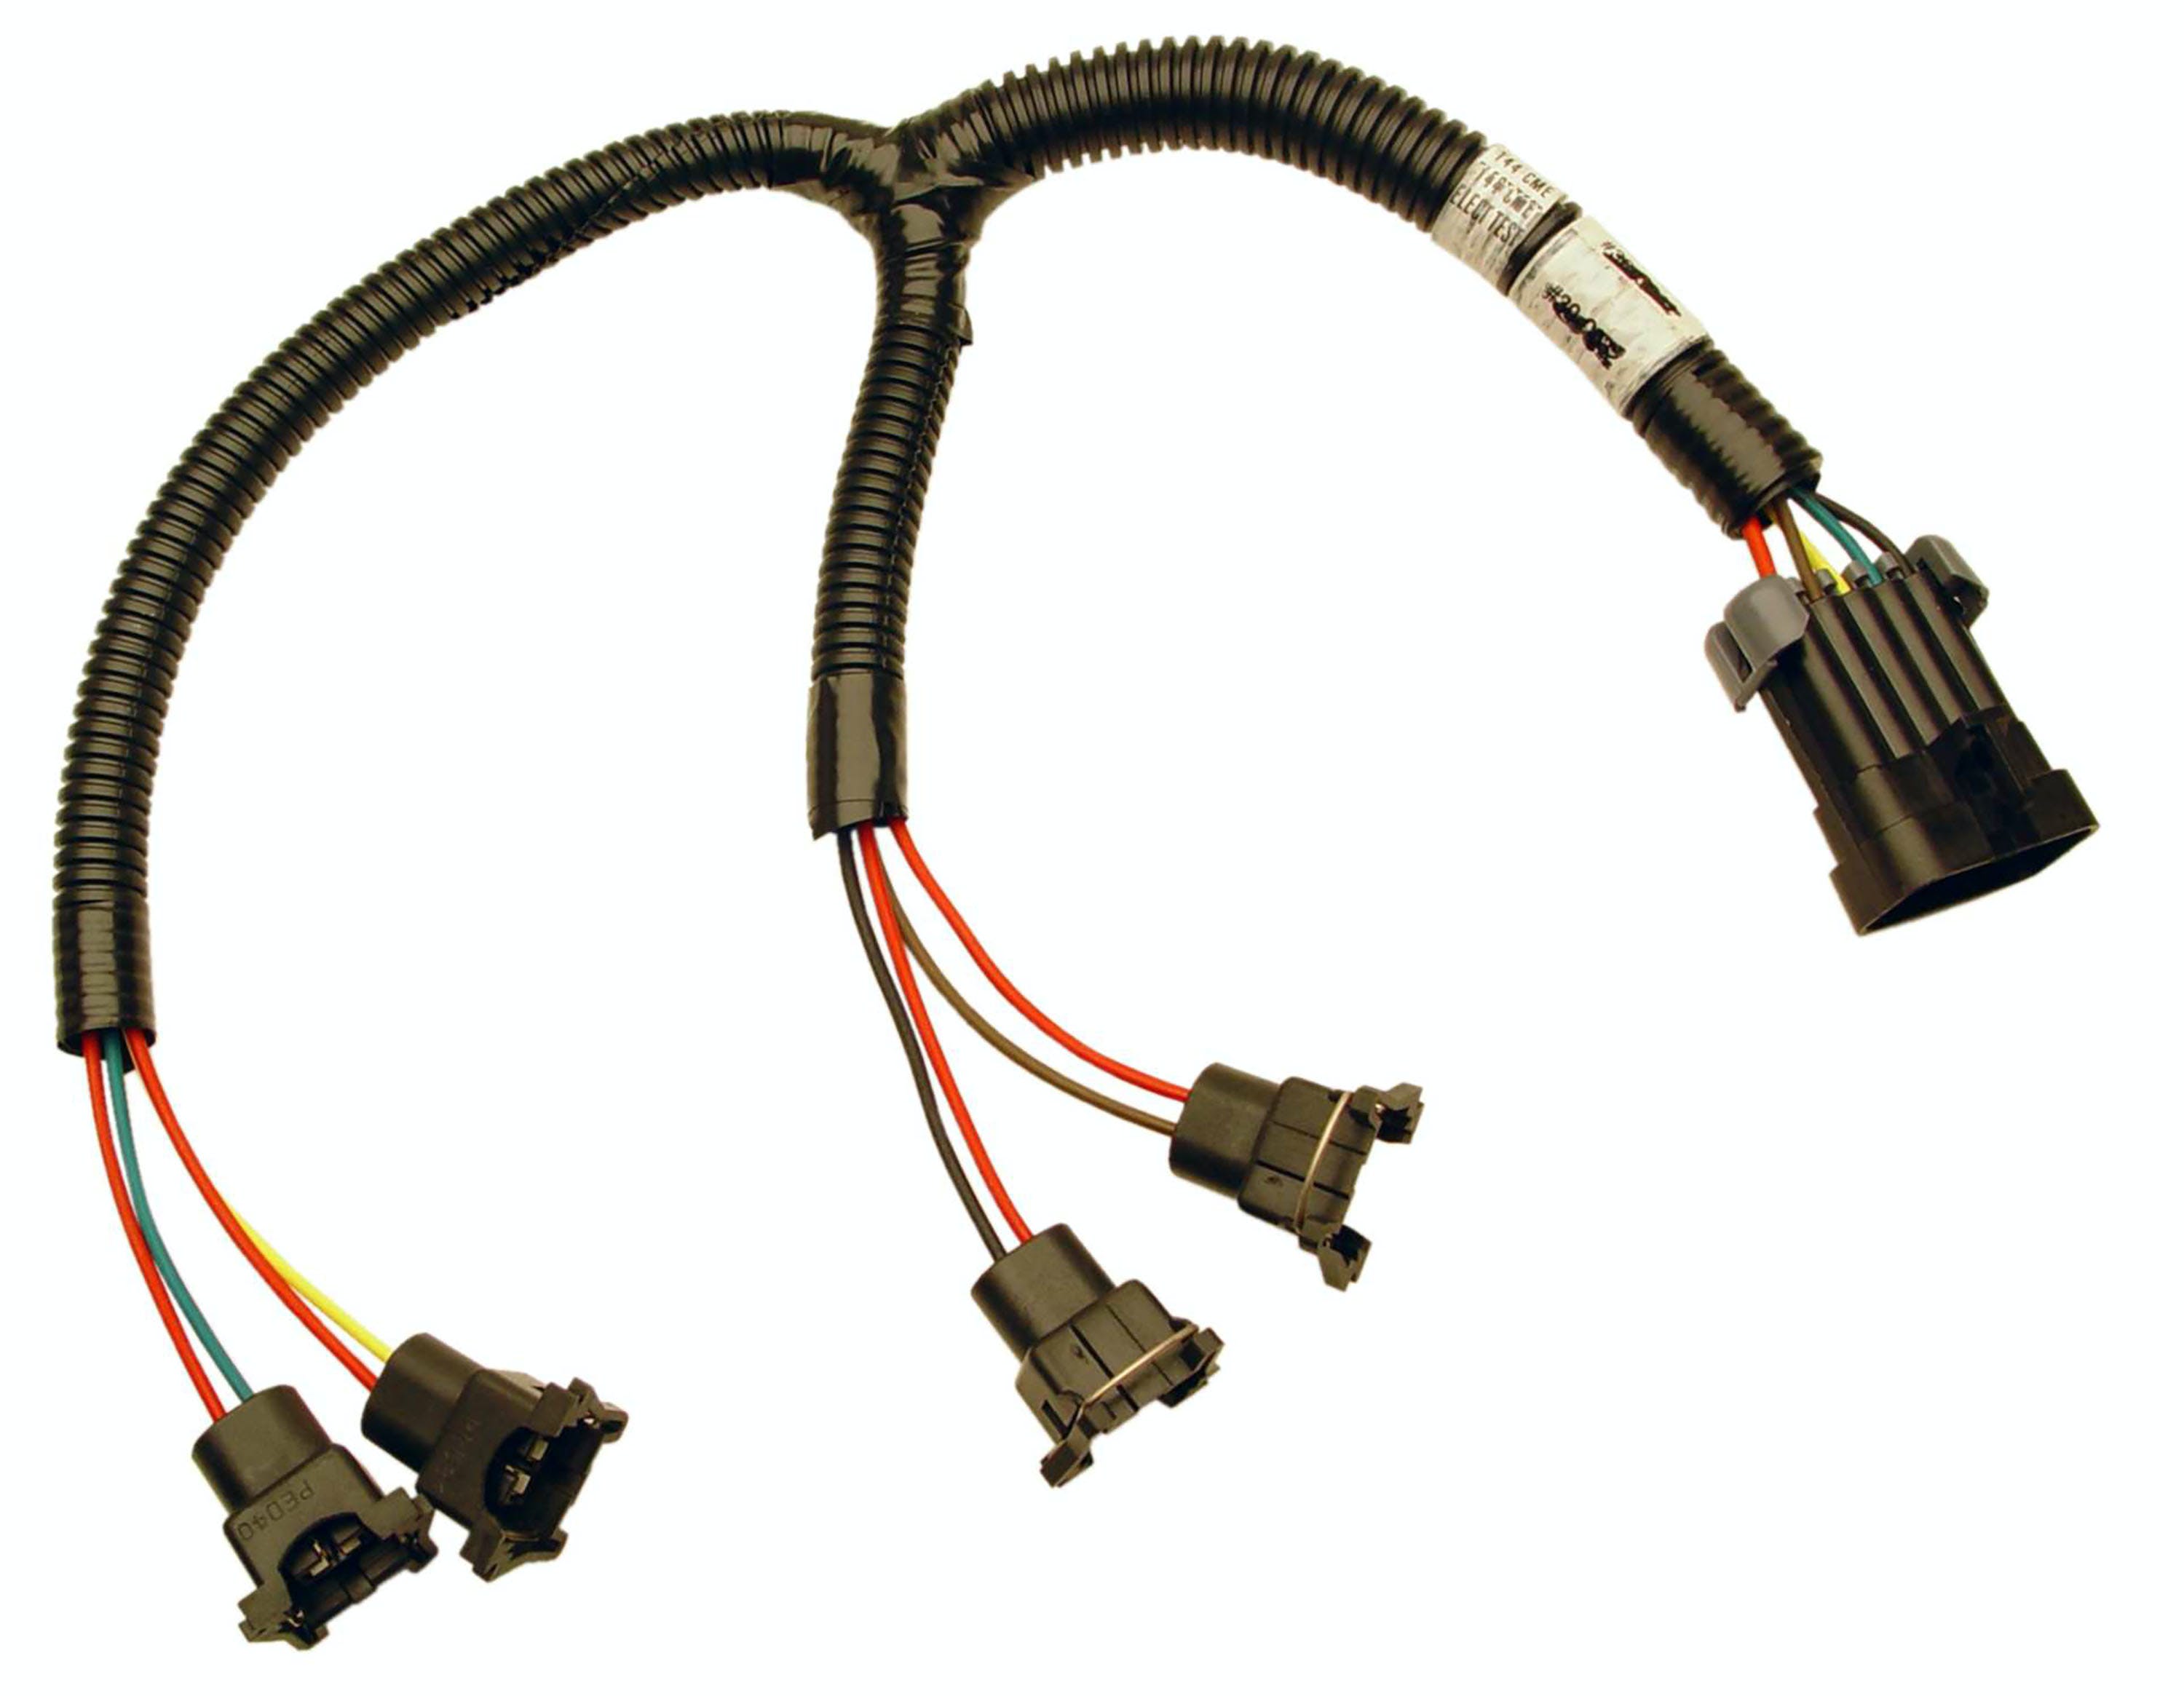 FAST - Fuel Air Spark Technology 301200 Fuel Injection Harness